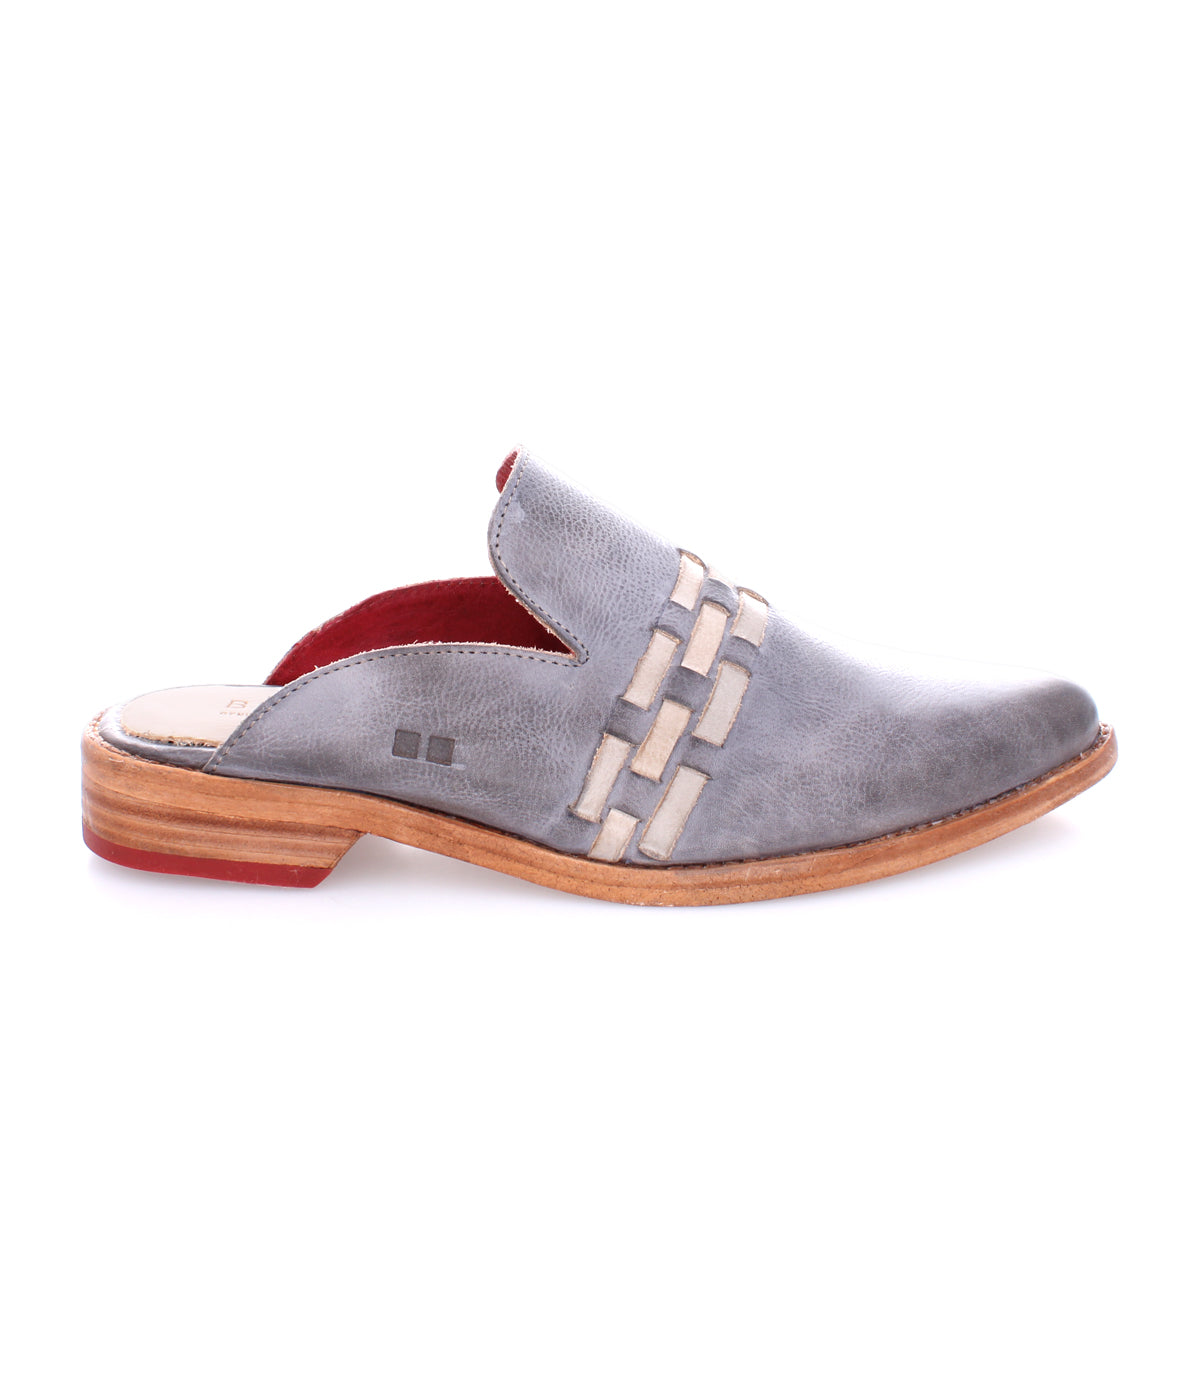 A grey slip on Asenet shoe with a red sole by Bed Stu.